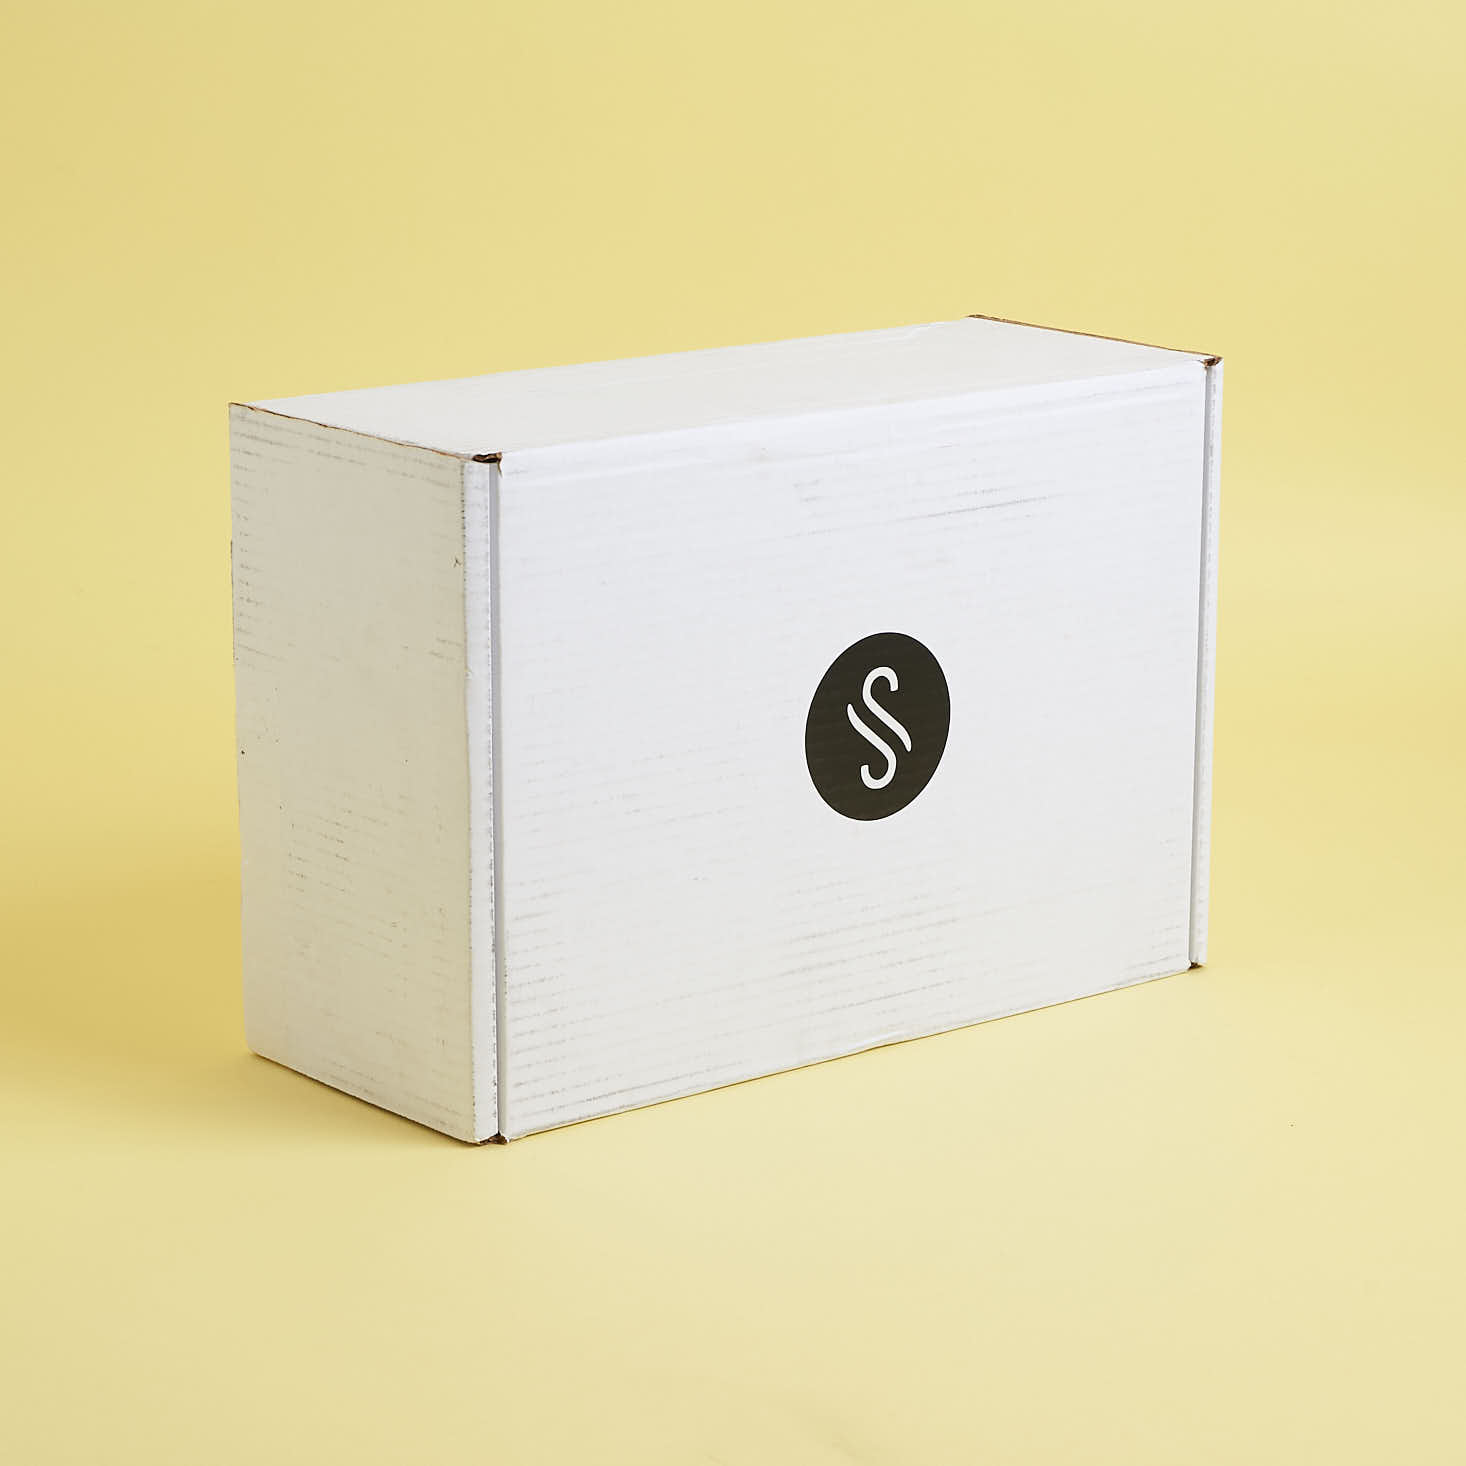 Stylogic Clothing Subscription Box Review – March 2018